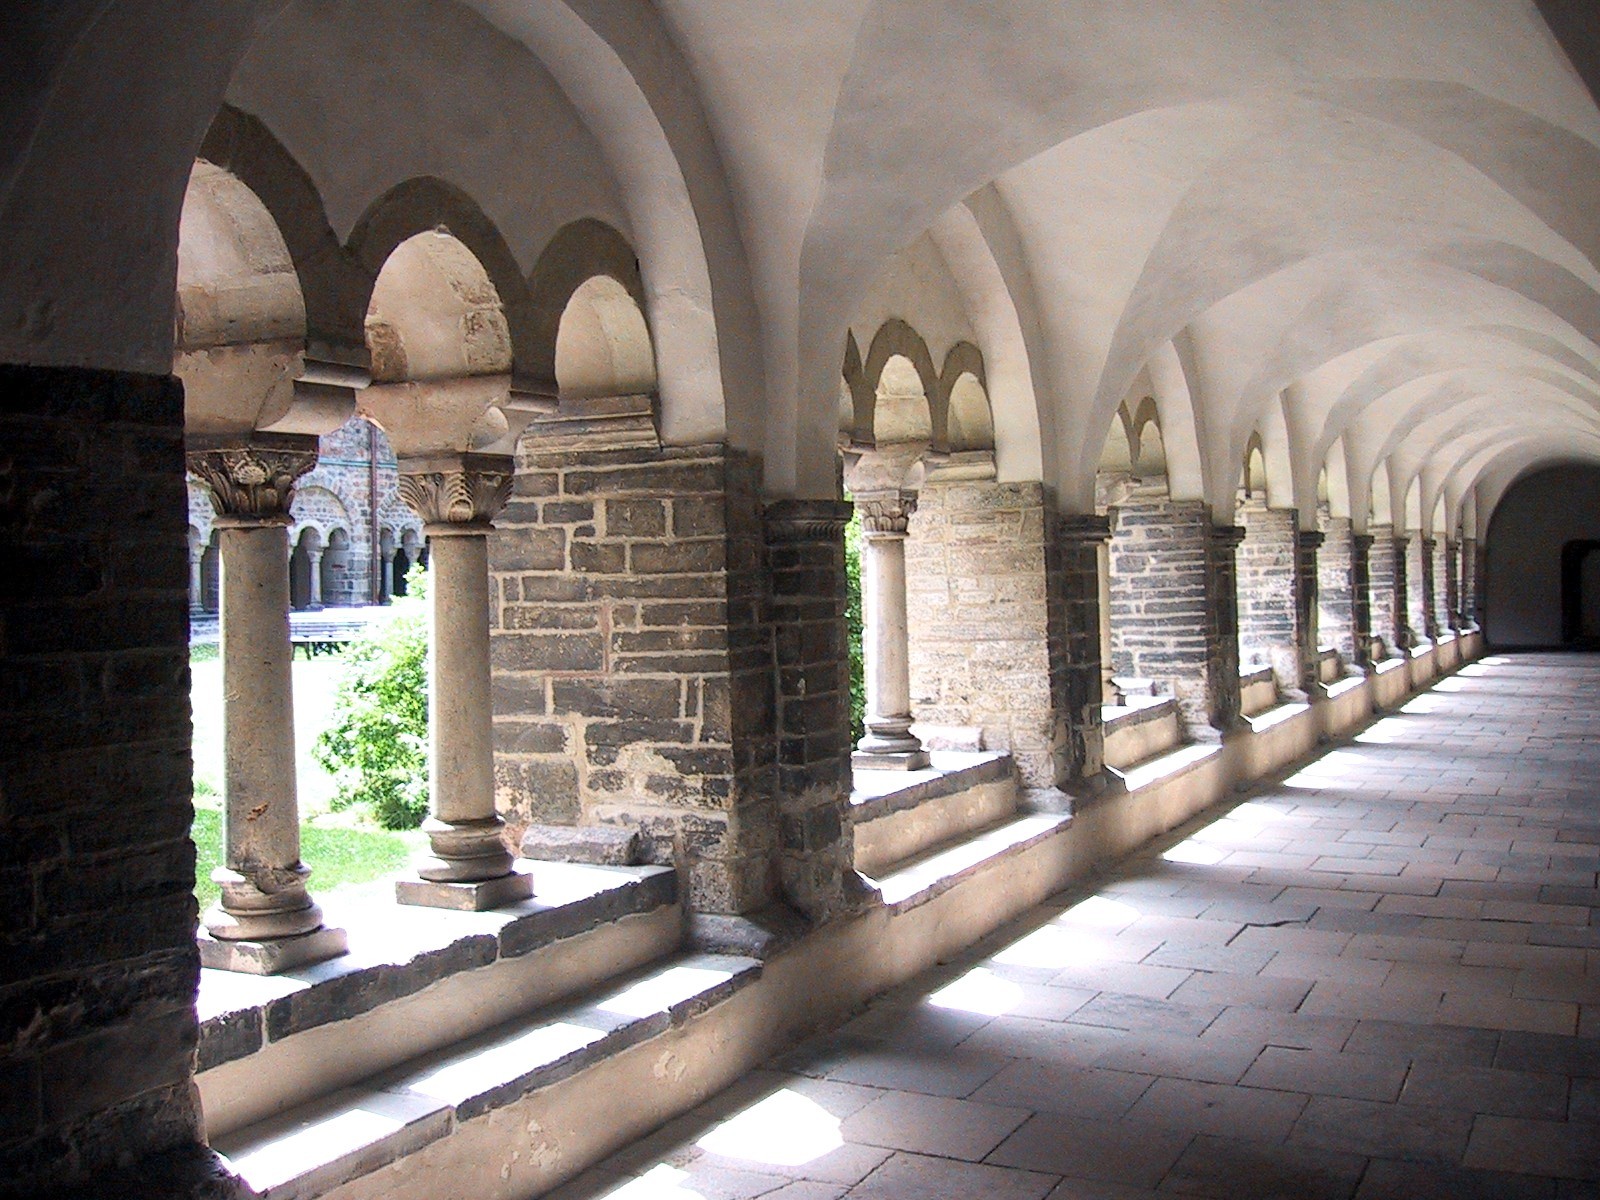 http://dic.academic.ru/pictures/wiki/files/67/Cloister_of_the_monastery_Unser_Lieben_Frauen_Magdeburg.jpg